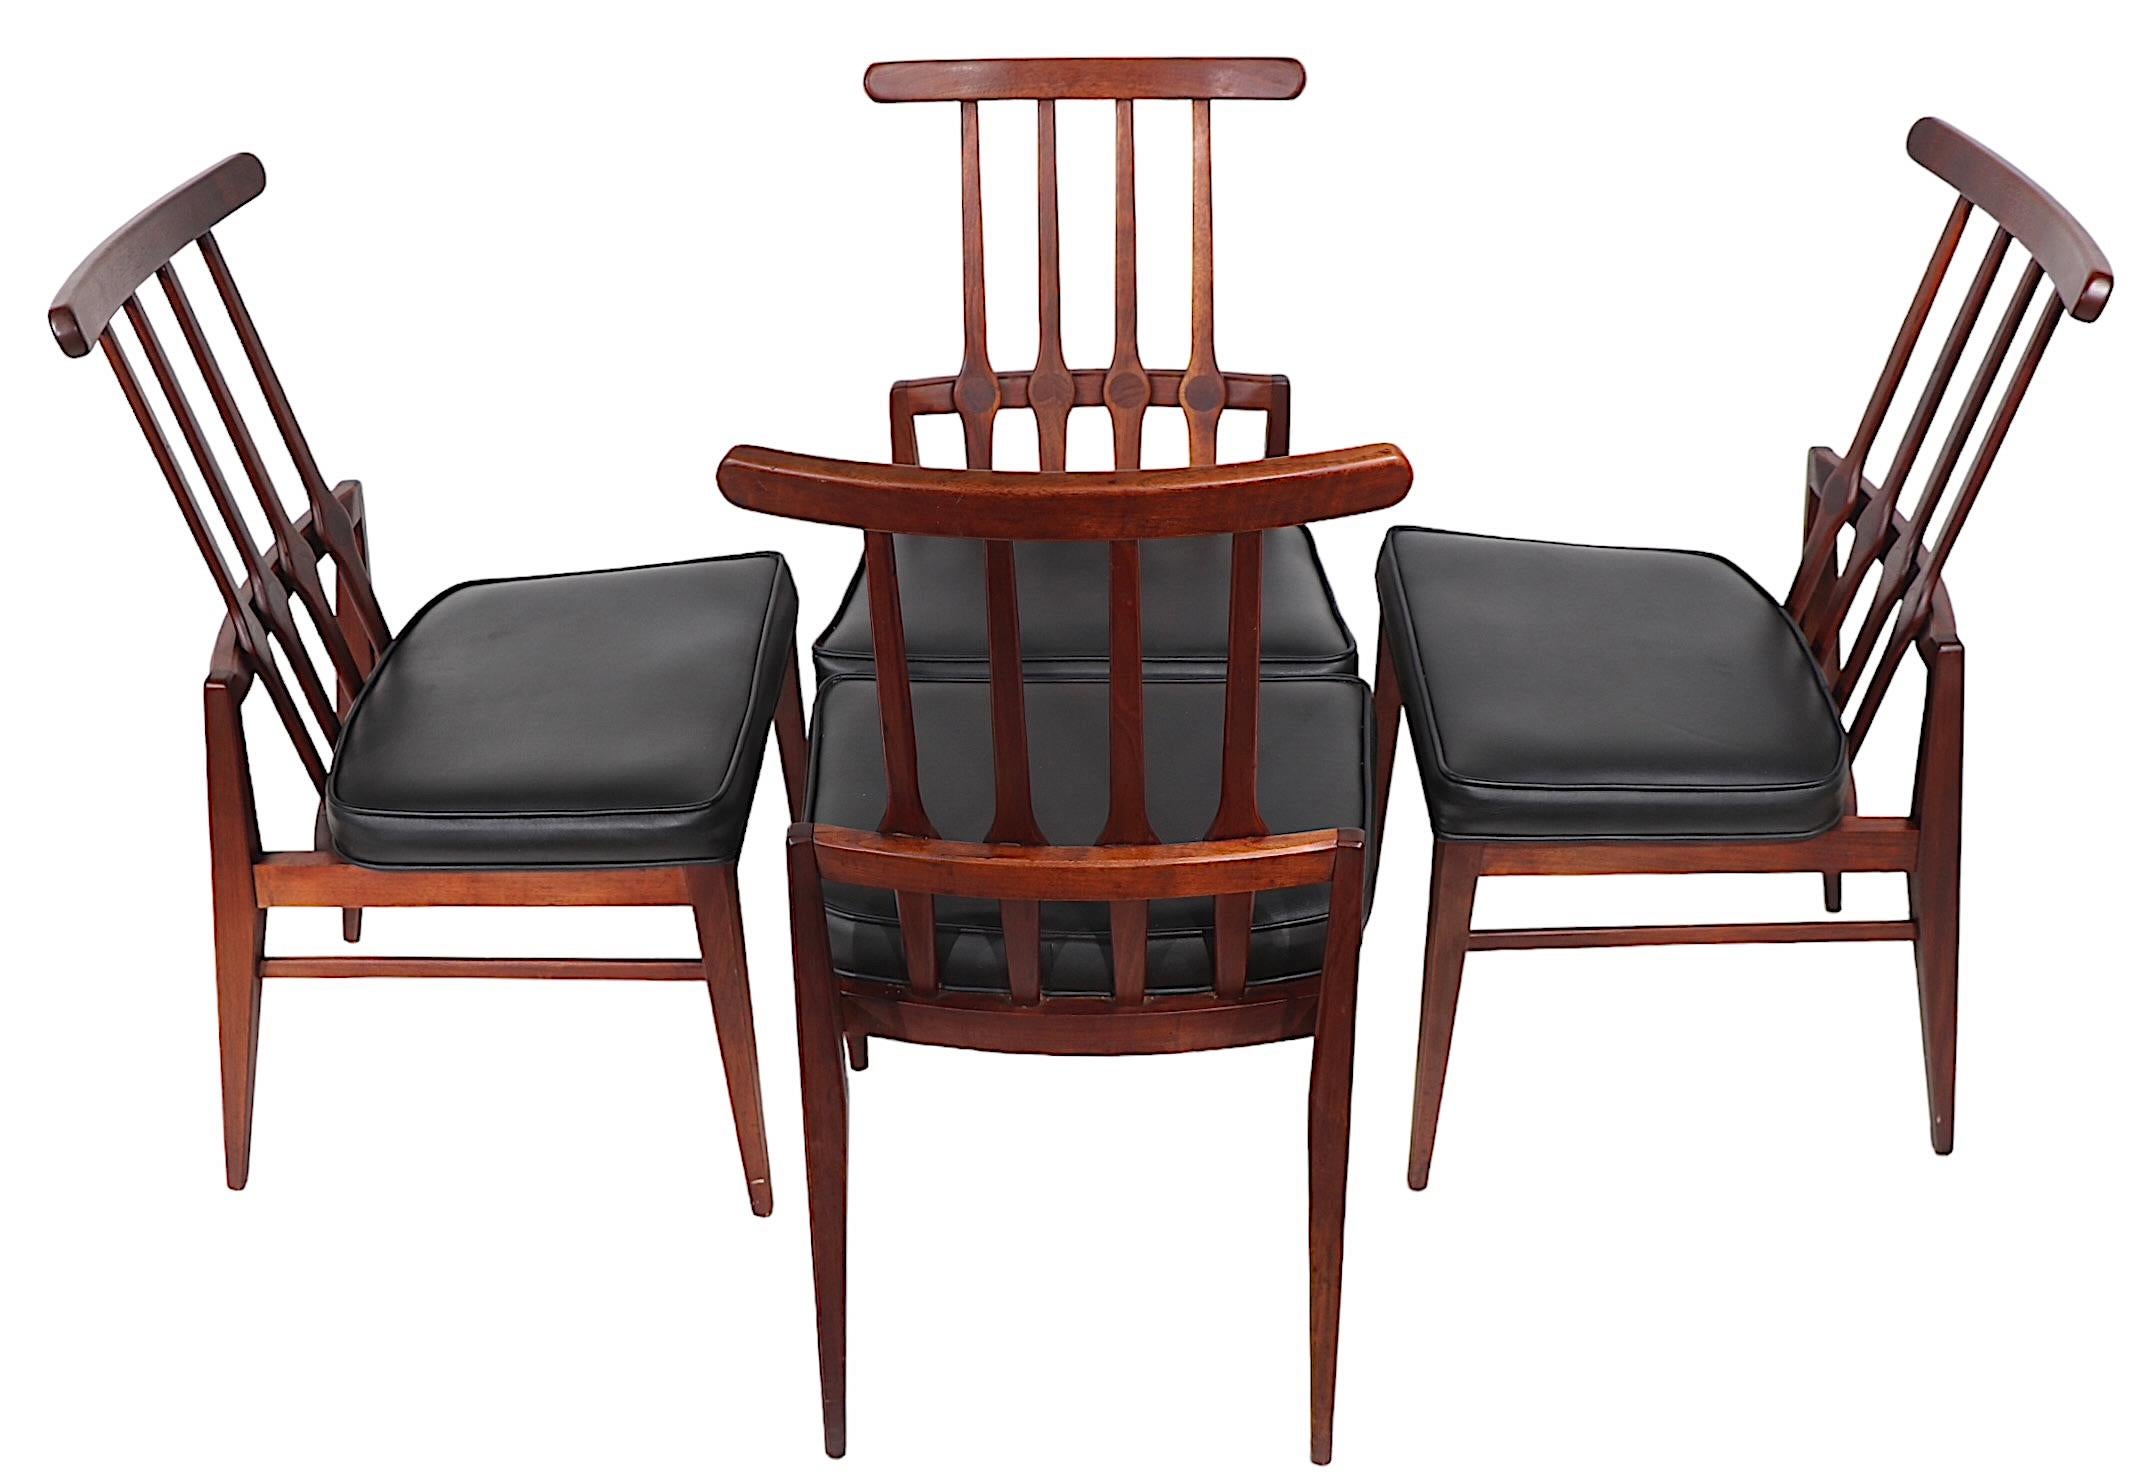 Set of Four Mid Century Dining Chairs by Foster - McDavid c 1950/1960's  For Sale 7